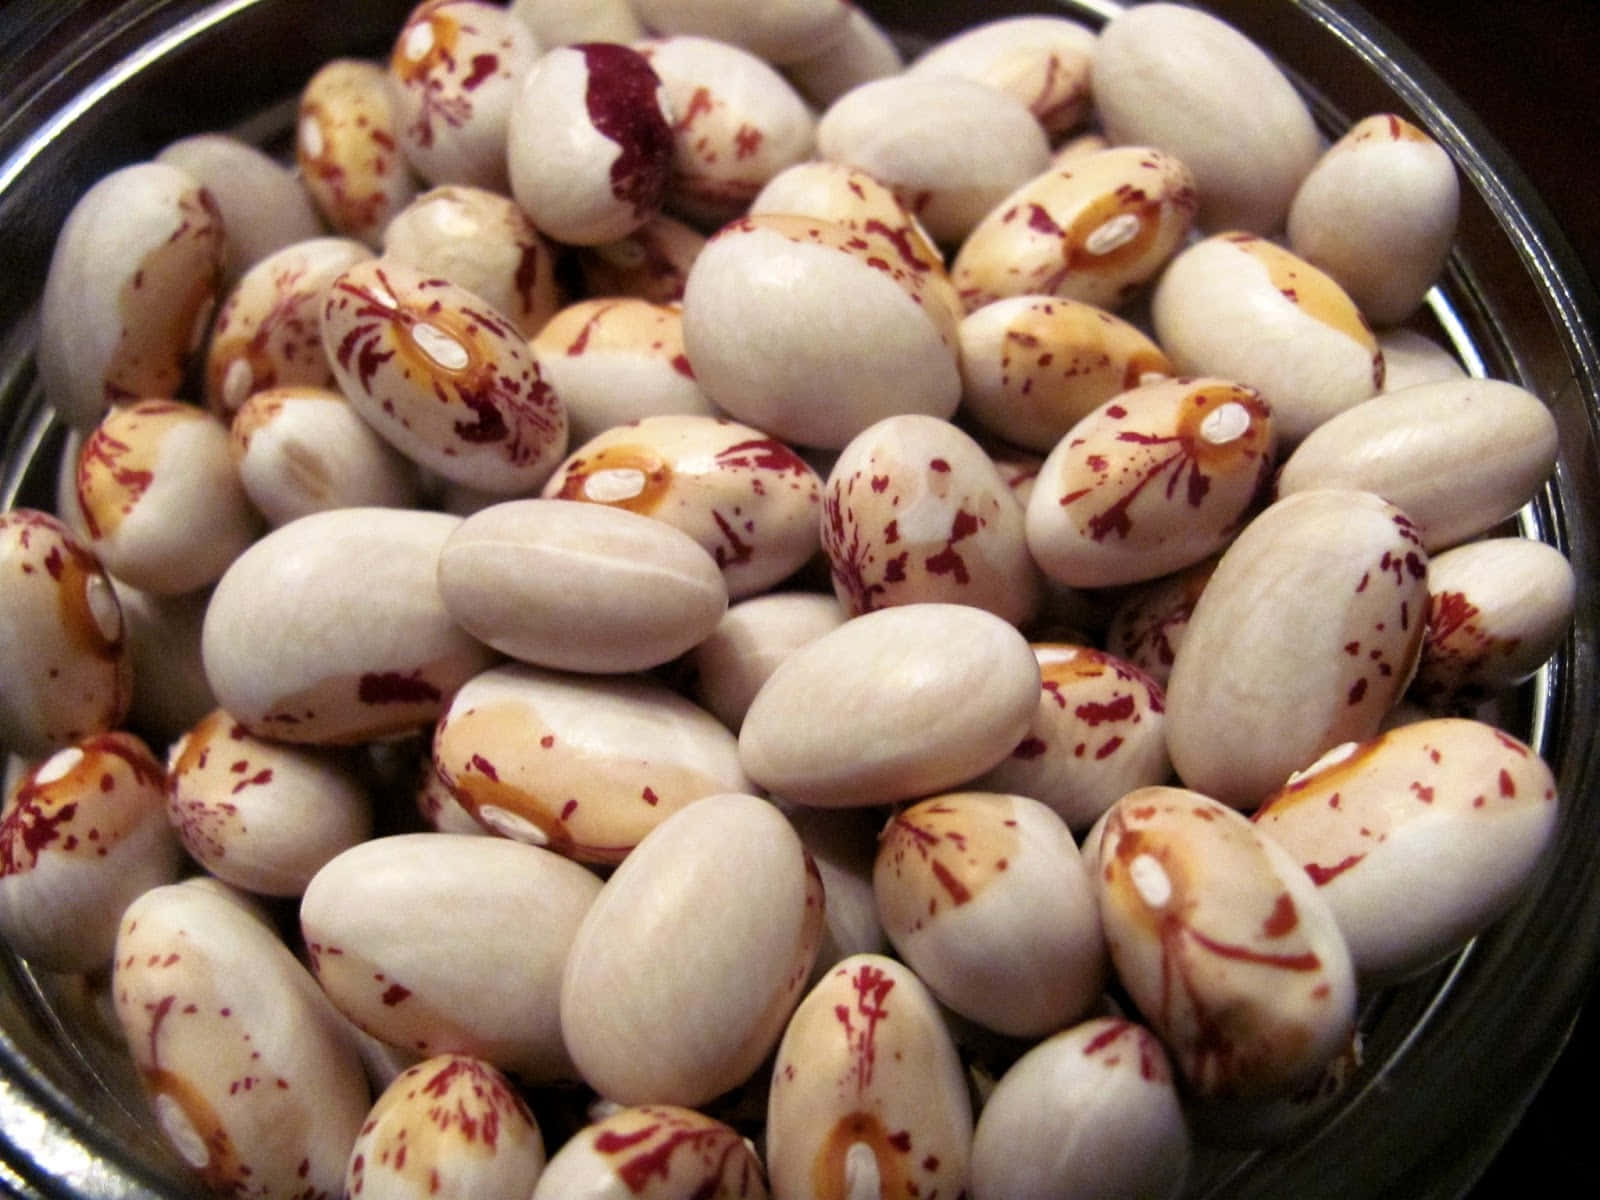 Delicious beans for you to enjoy.